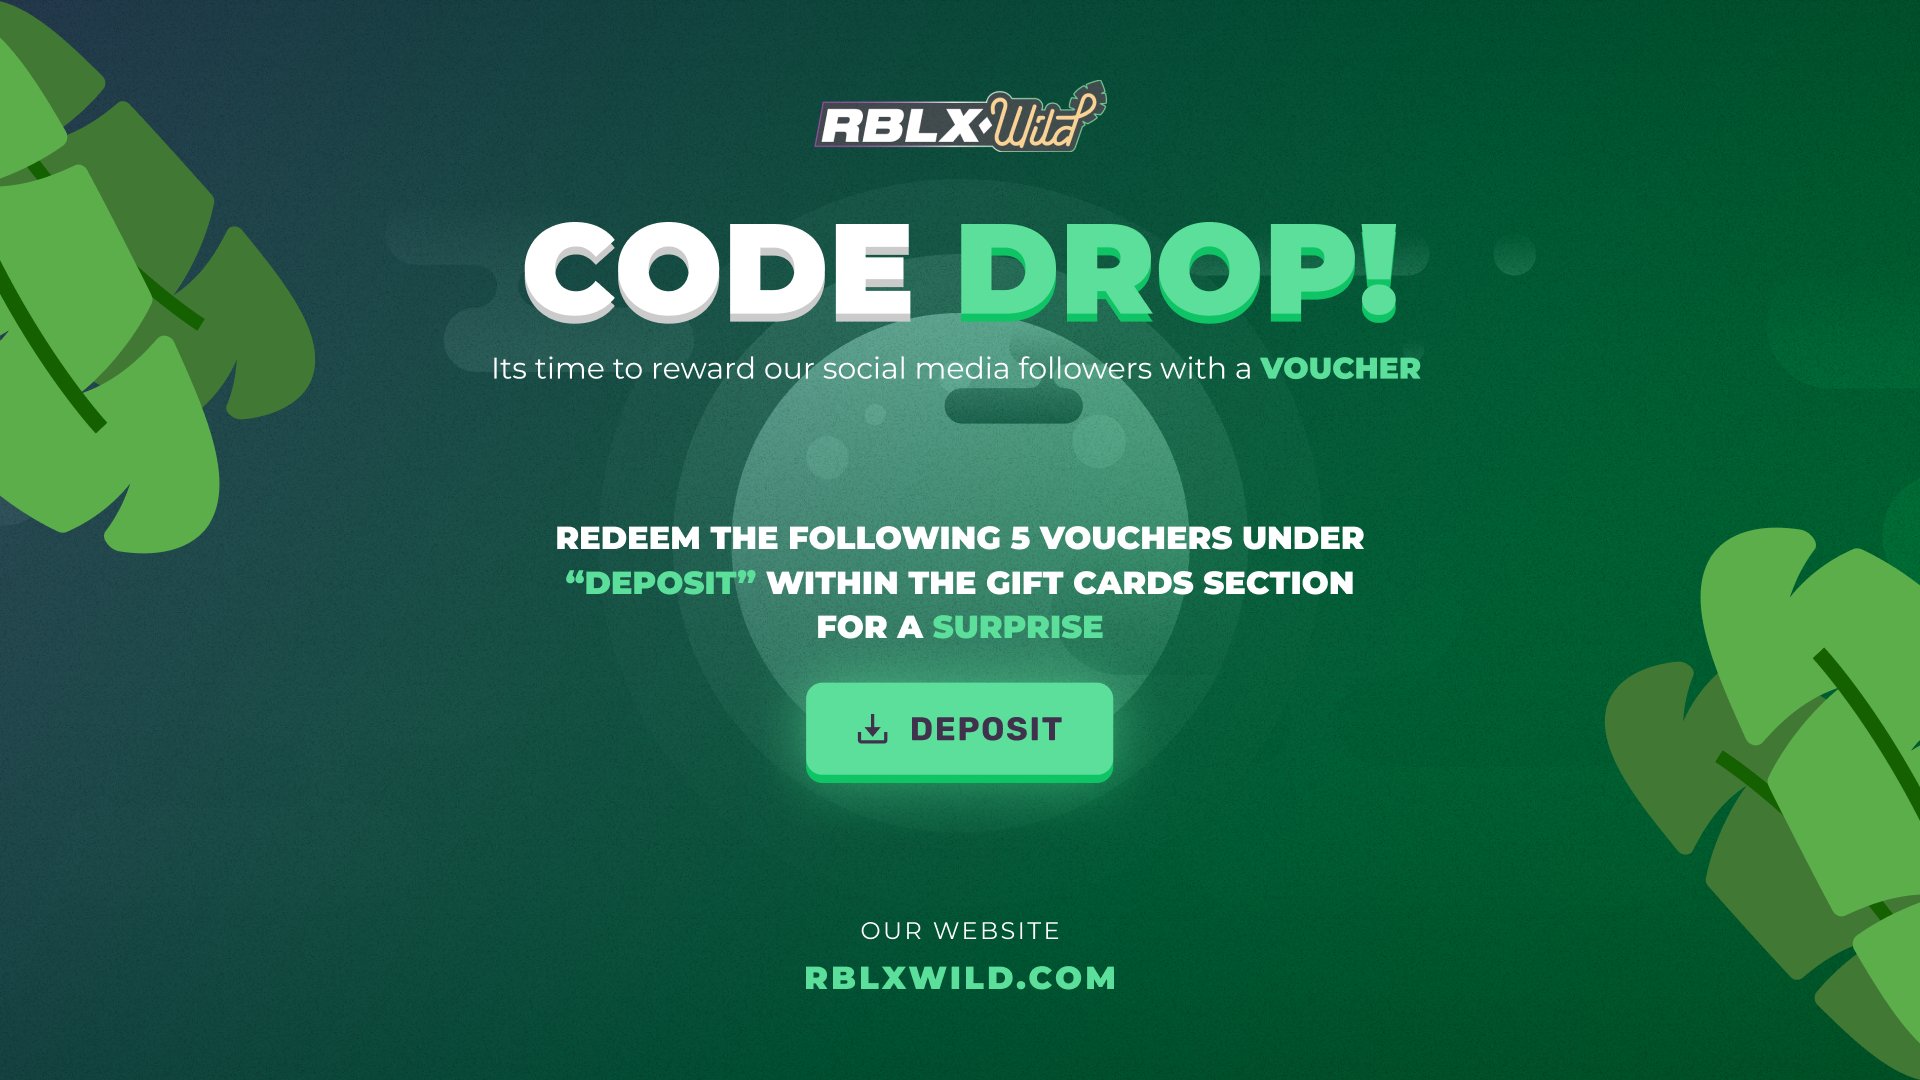 How To Redeem Codes On RBLXWILD And Get *FREE* Robux! 